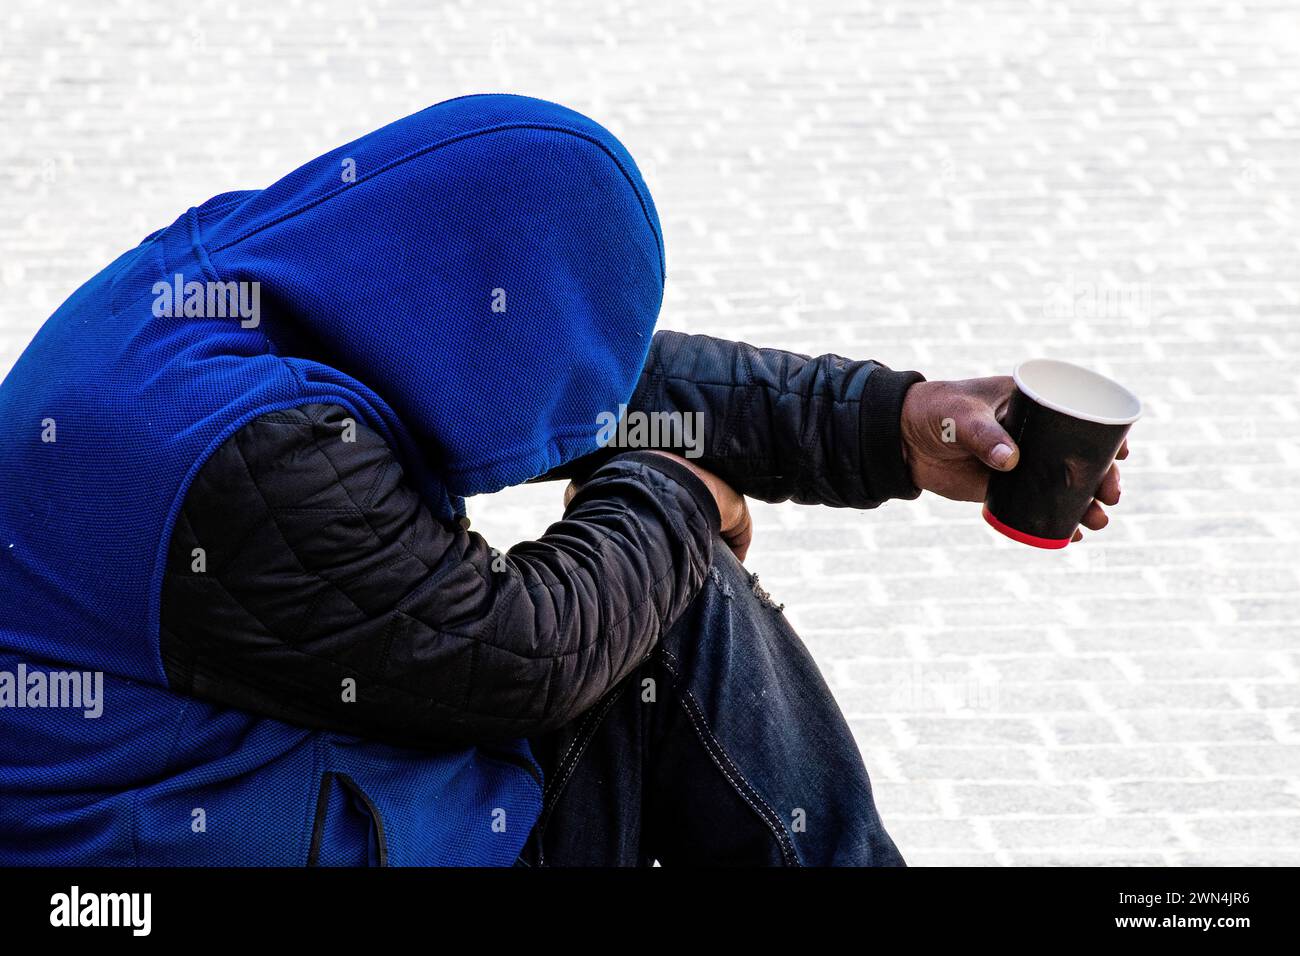 African American man wearing a jacket and royal blue hoody, with outstretched arm holding a cup and seeking donations. Stock Photo